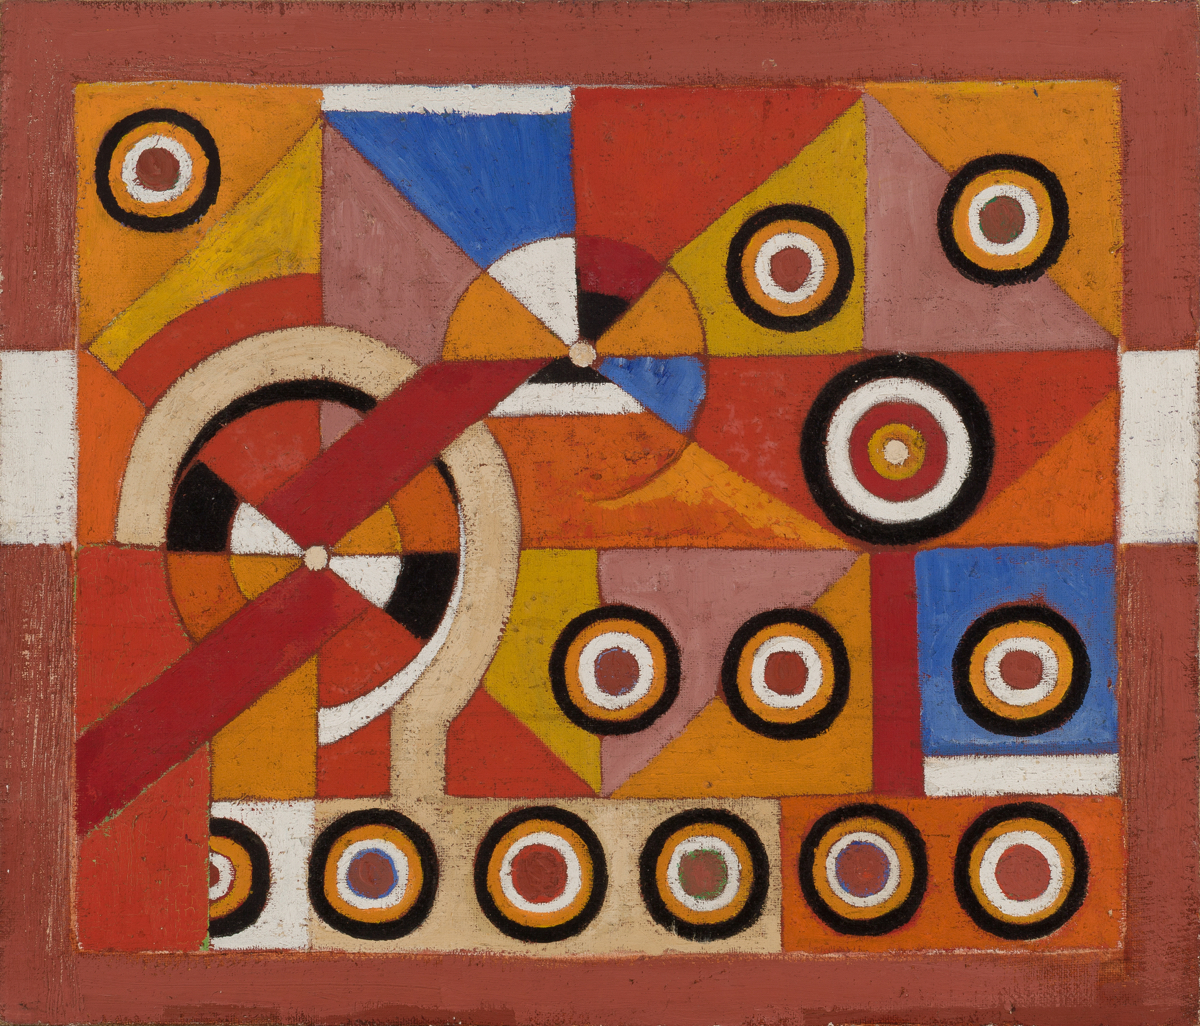 Haywood "Bill" Rivers, Untitled (Geometric Composition), Oil on canvas, 1970. Abstract oil painting of geometric shapes and concentric circles in red, orange, yellow, and blue.